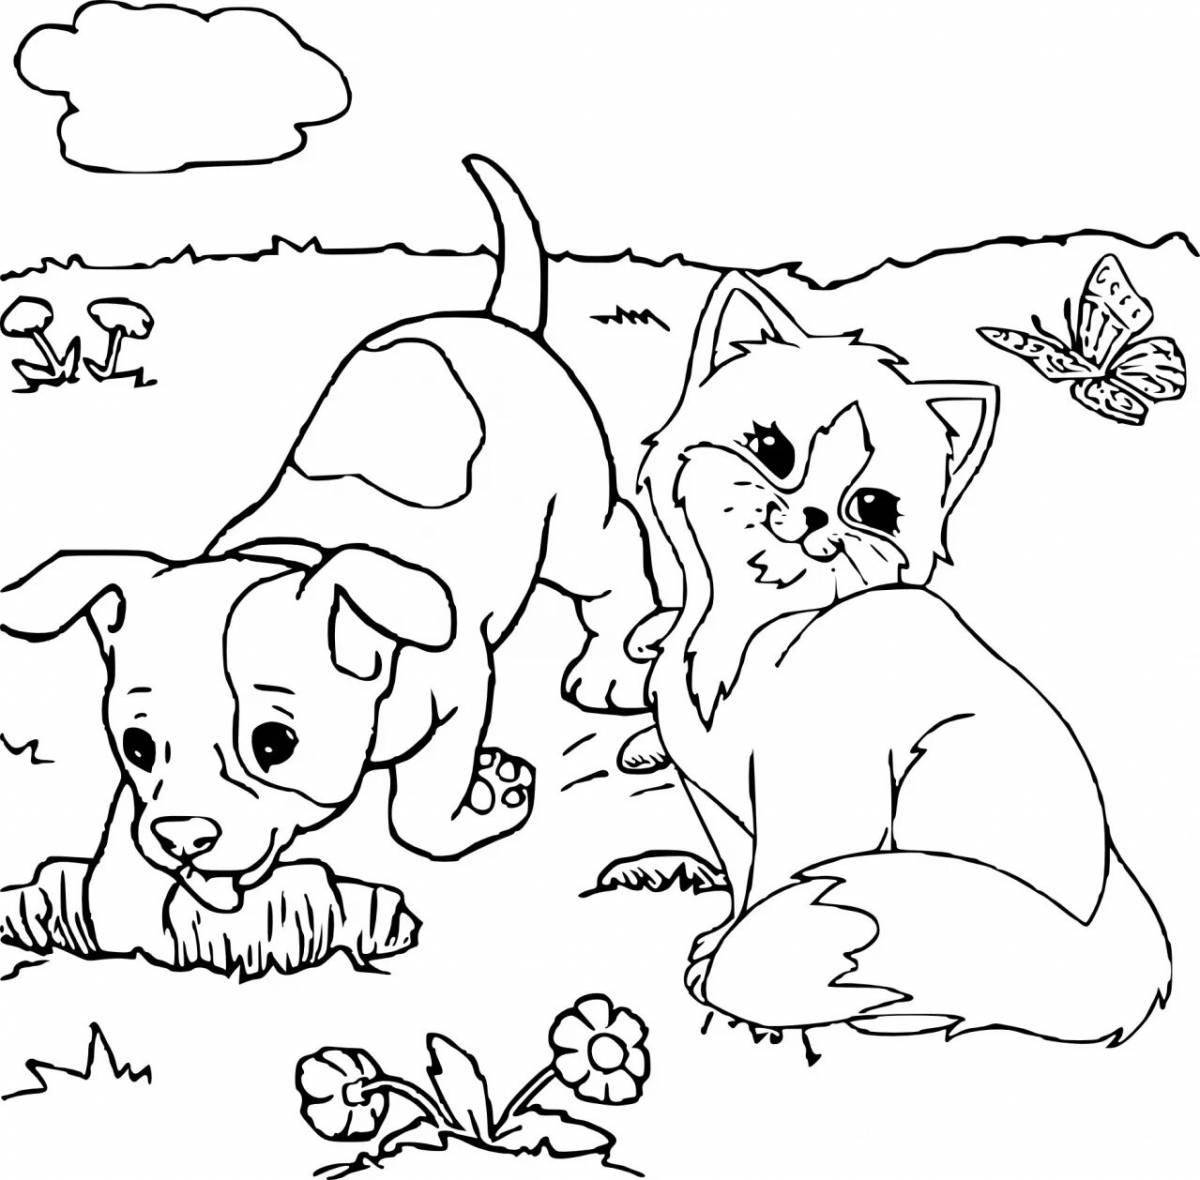 Adorable dog coloring book for kids 5-6 years old